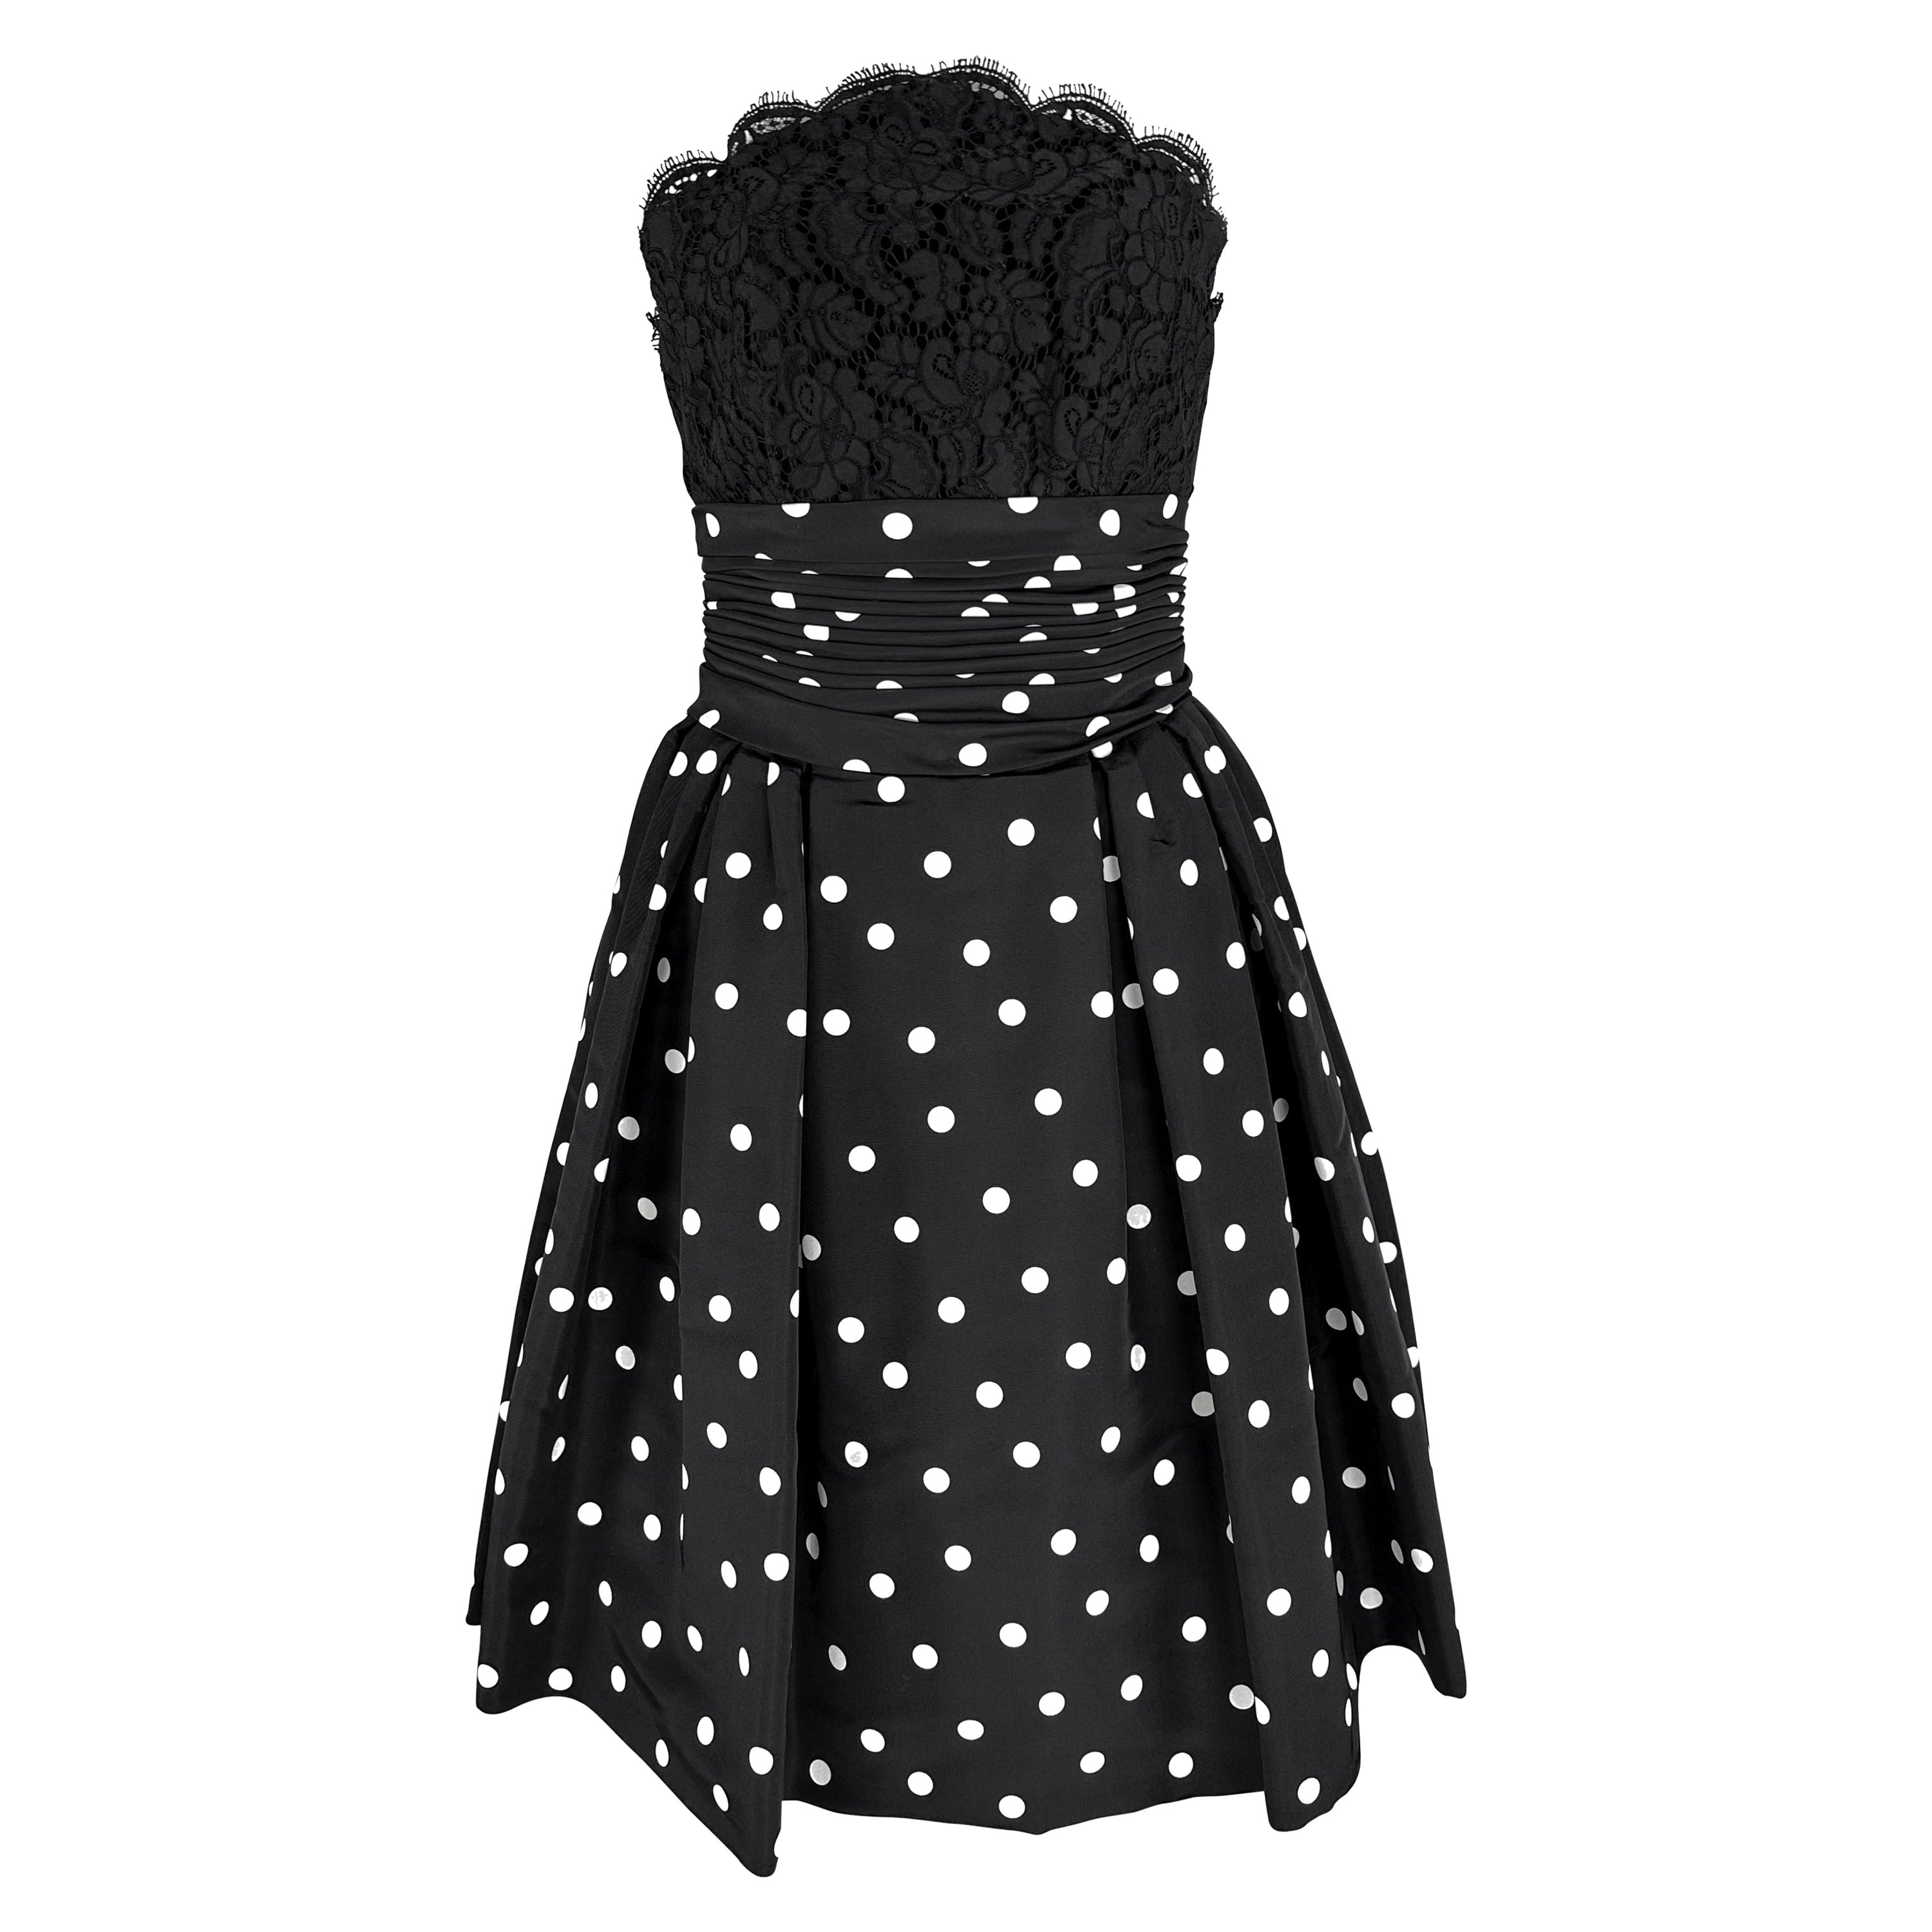  S/S 1988 Chanel by Karl Lagerfeld Runway Polka Dot Lace Strapless Flare Dress For Sale